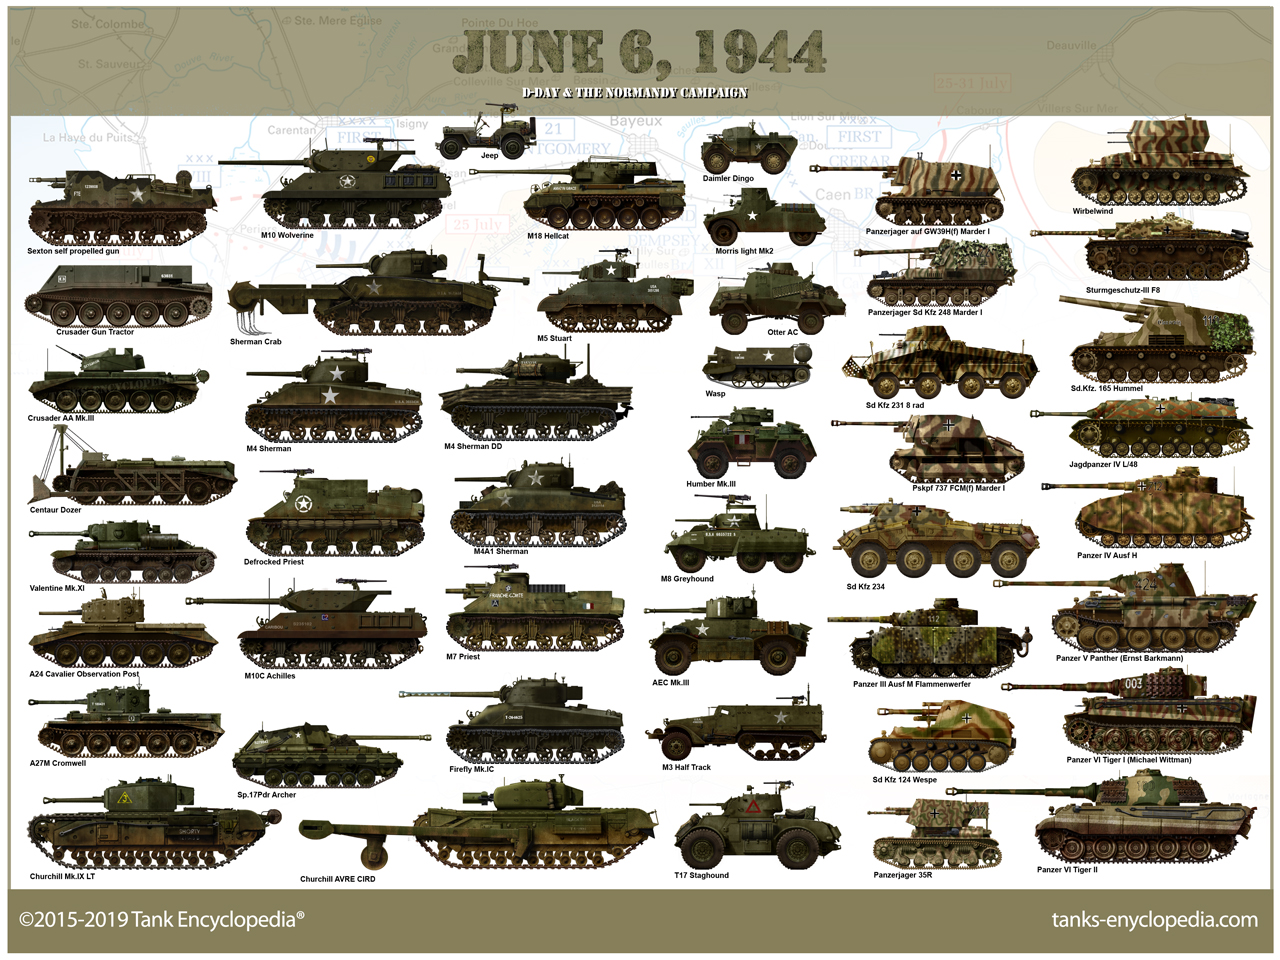 WW2 German Wehrmacht Africa Corps Tanks and Armored Vehicles Poster.